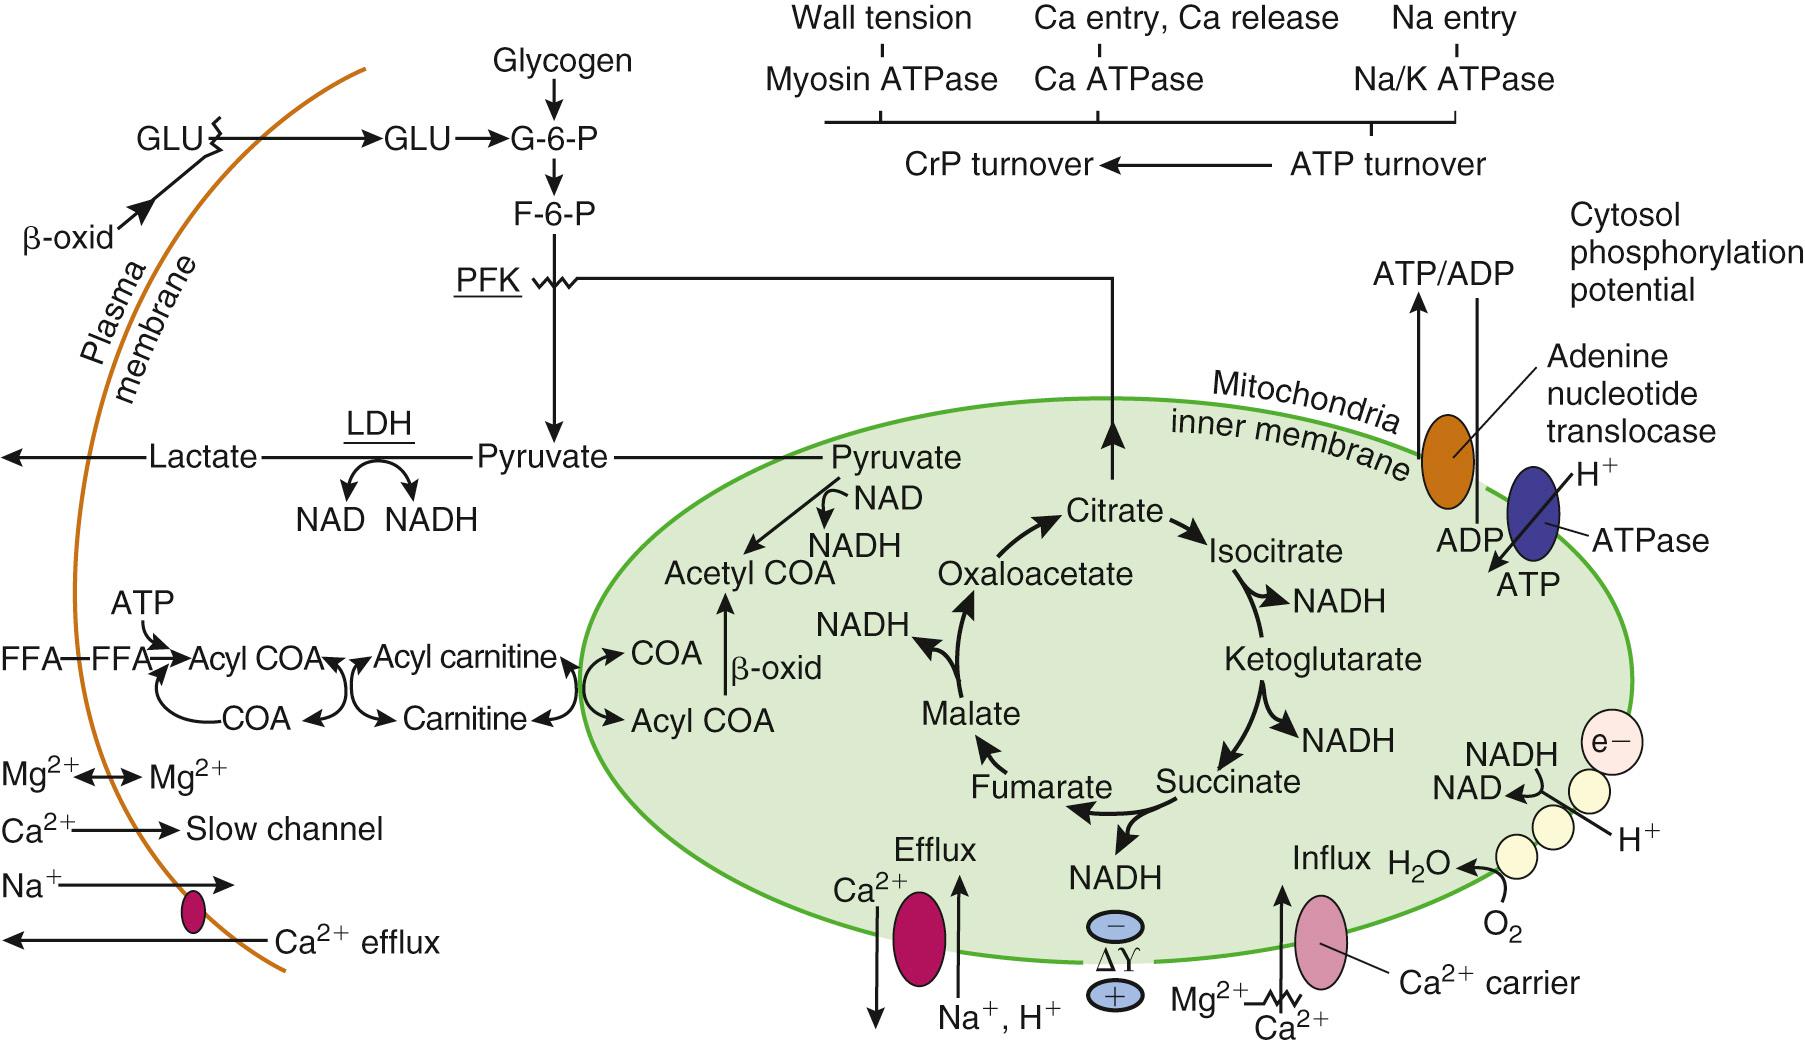 FIGURE 65-2, The biochemical anatomy of the normal functioning myocardial cell. The three main reactions using ATP are (1) myosin ATPase involved in the development of wall tension, (2) Ca 2+ ,Mg 2+ -ATPase involved in sequestration of Ca 2+ that enters the cell with each beat and the Ca 2+ that is liberated from sarcoplasmic reticulum in the activation of contractile protein, and (3) Na + ,K + -ATPase involved in Na + efflux. The action of this vectorial ATPase establishes the monovalent cation gradient across the membrane that is used to maintain cell excitability and the efflux of Ca 2+ .